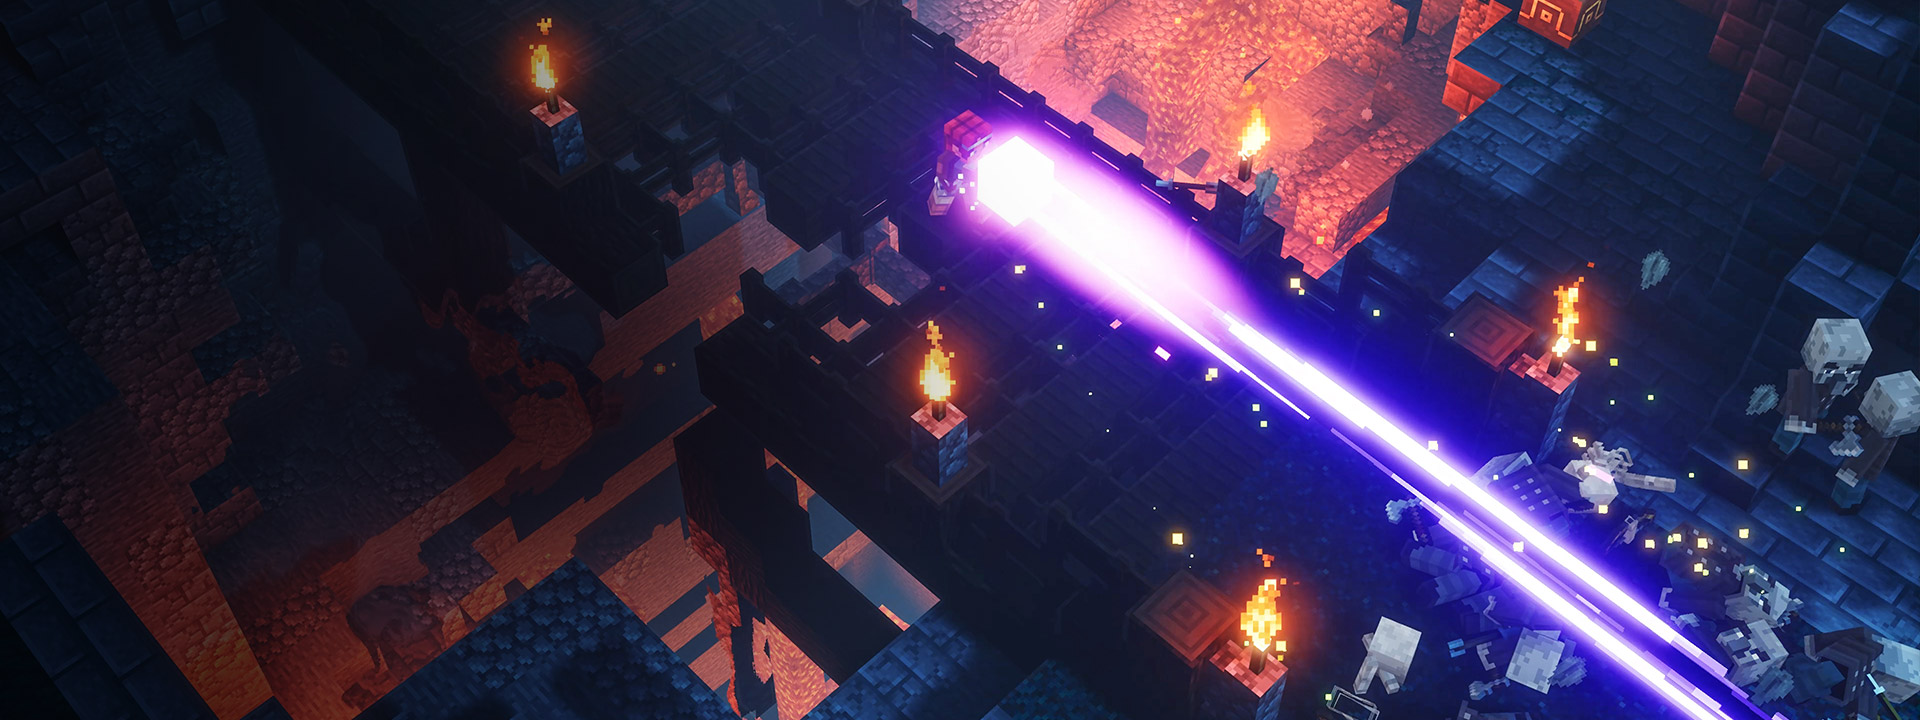 Main character destroying enemies by shooting a plasma ray out of a box